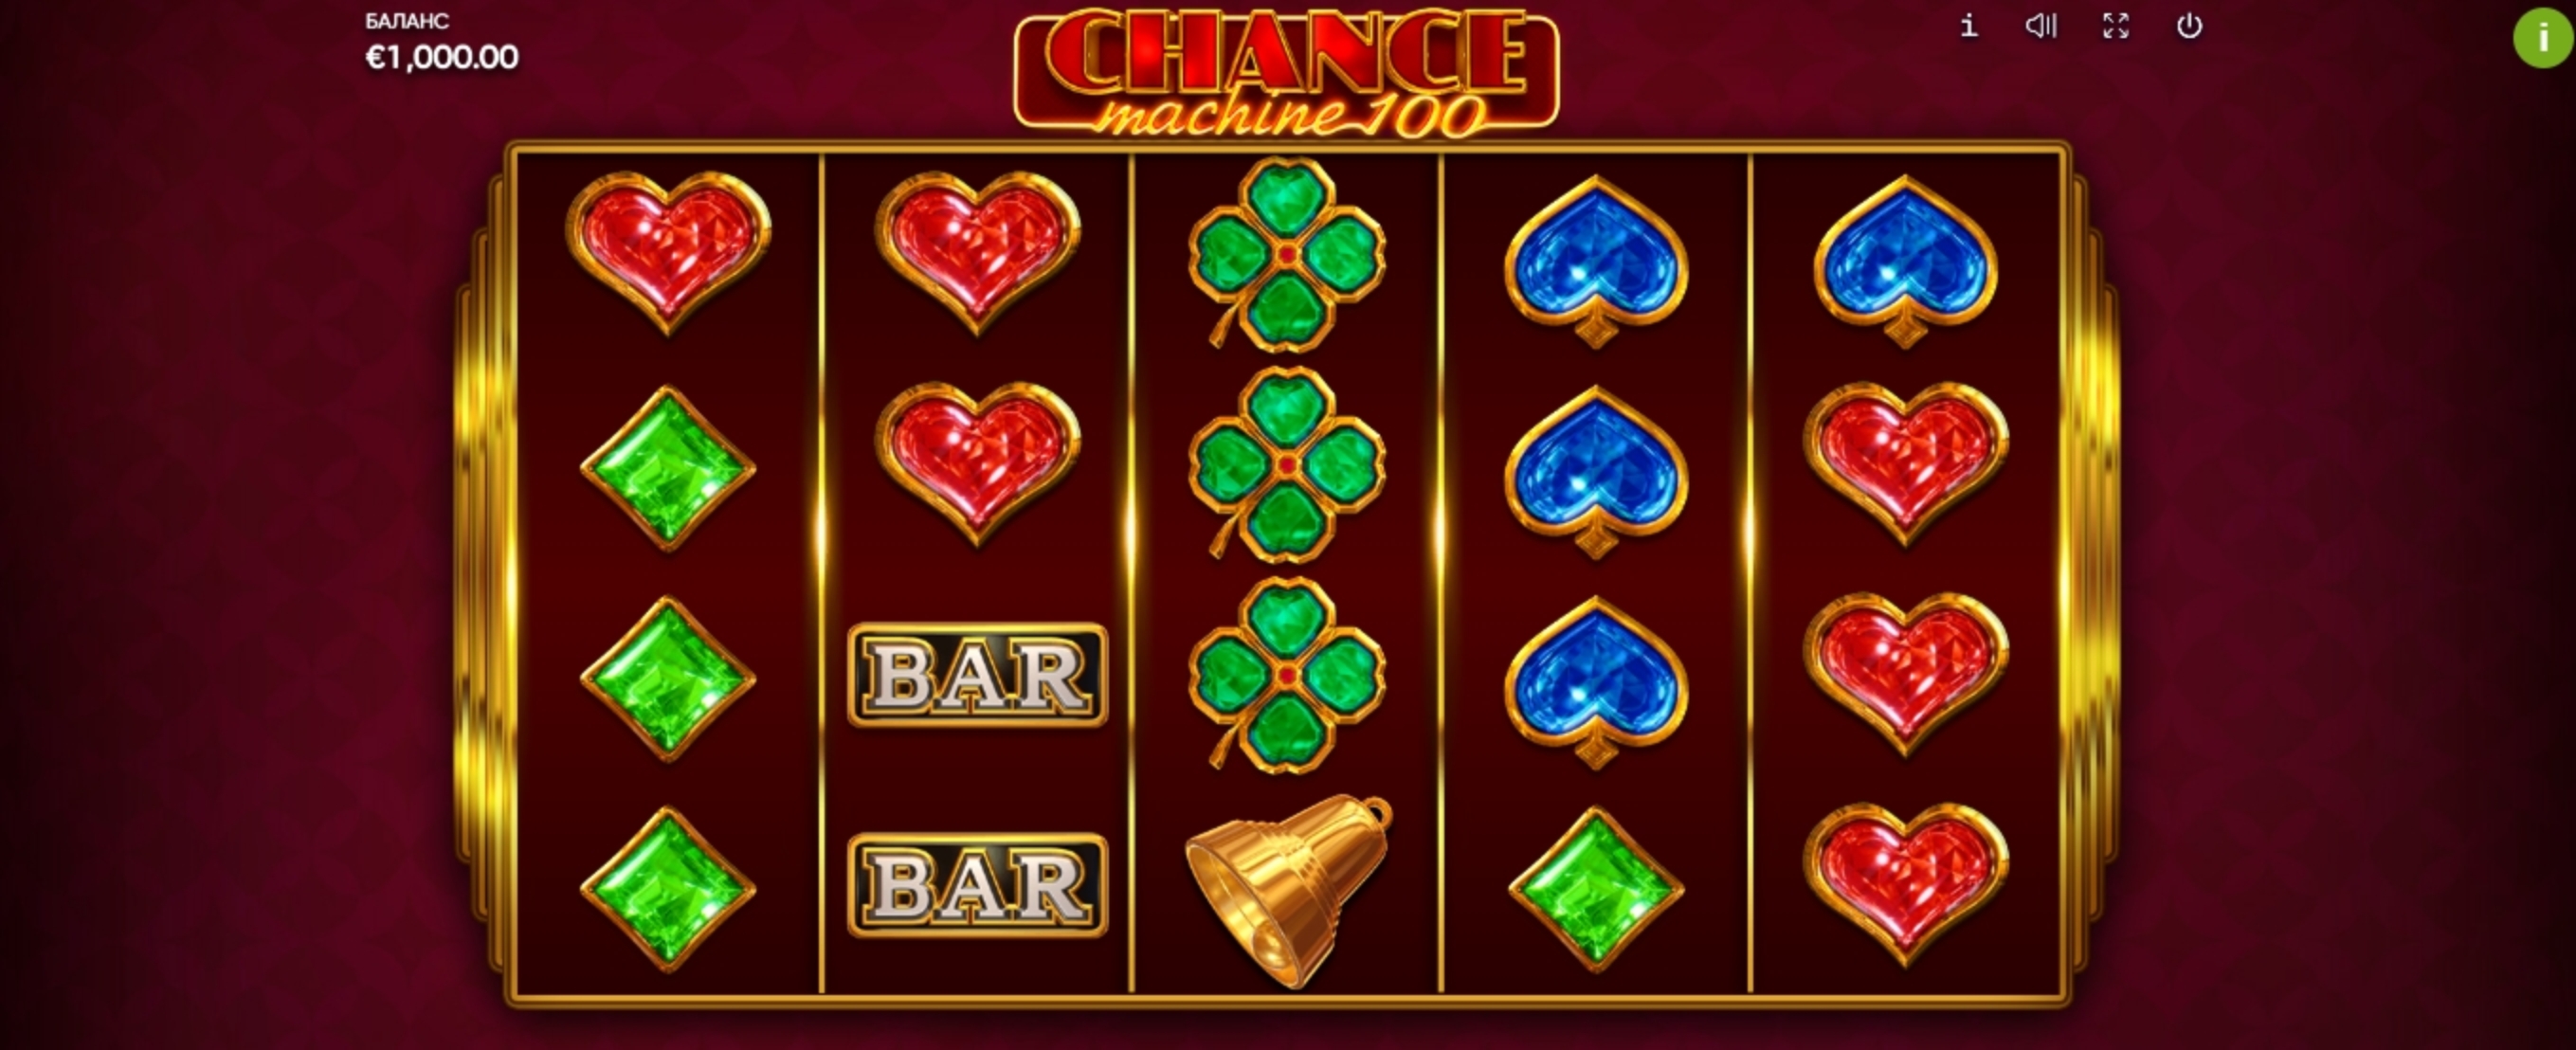 Reels in Chance Machine 100 Slot Game by Endorphina